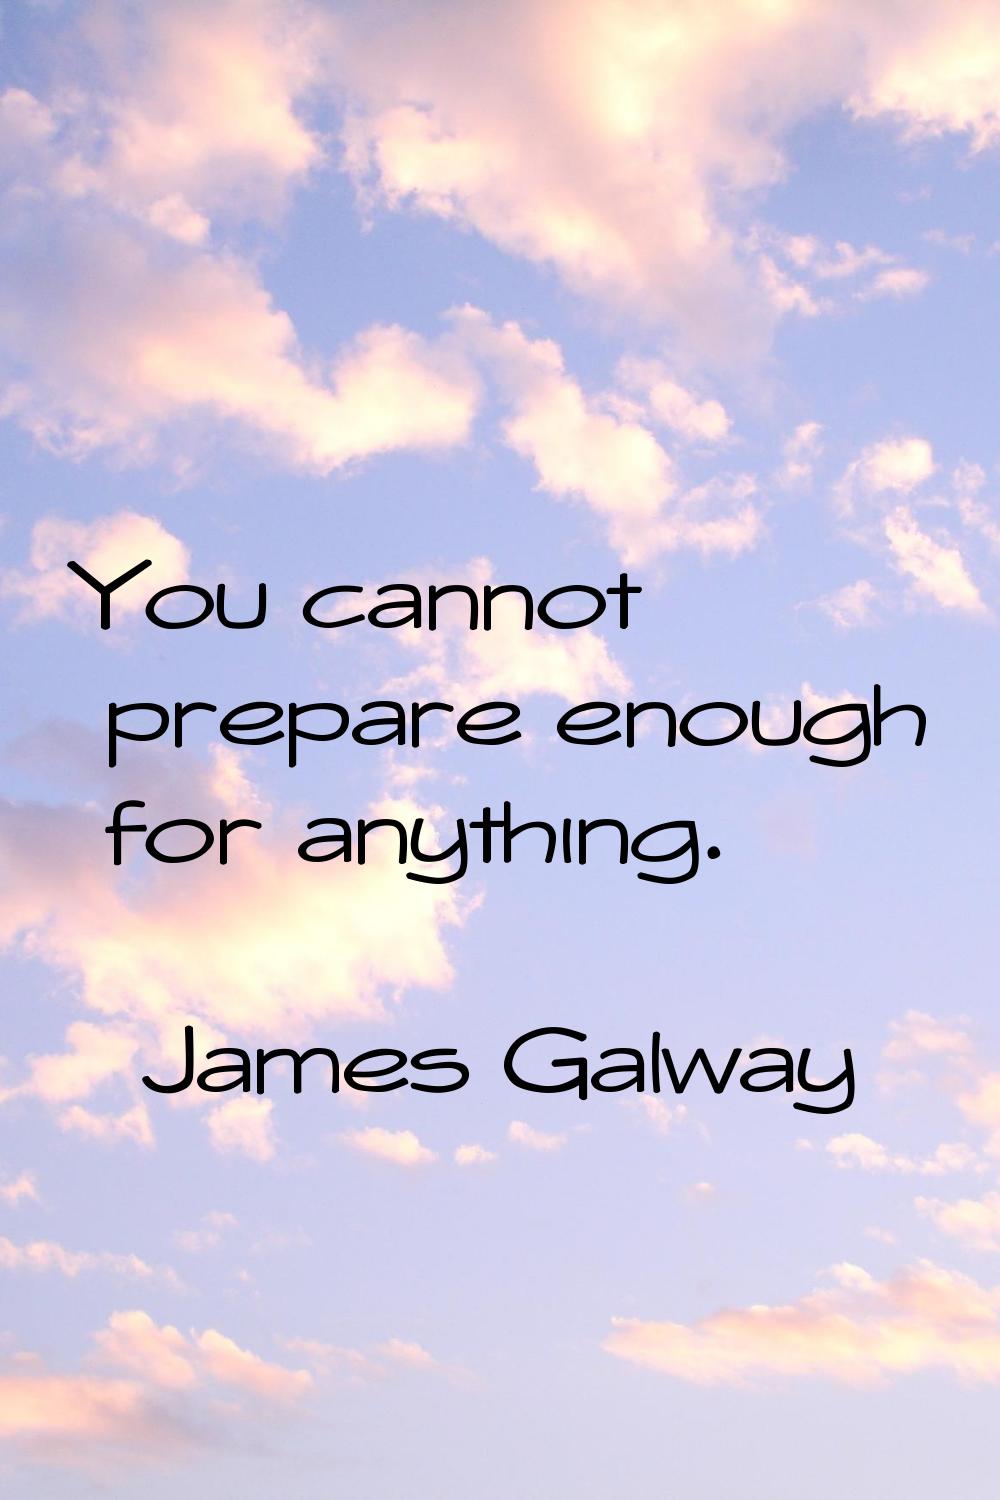 You cannot prepare enough for anything.